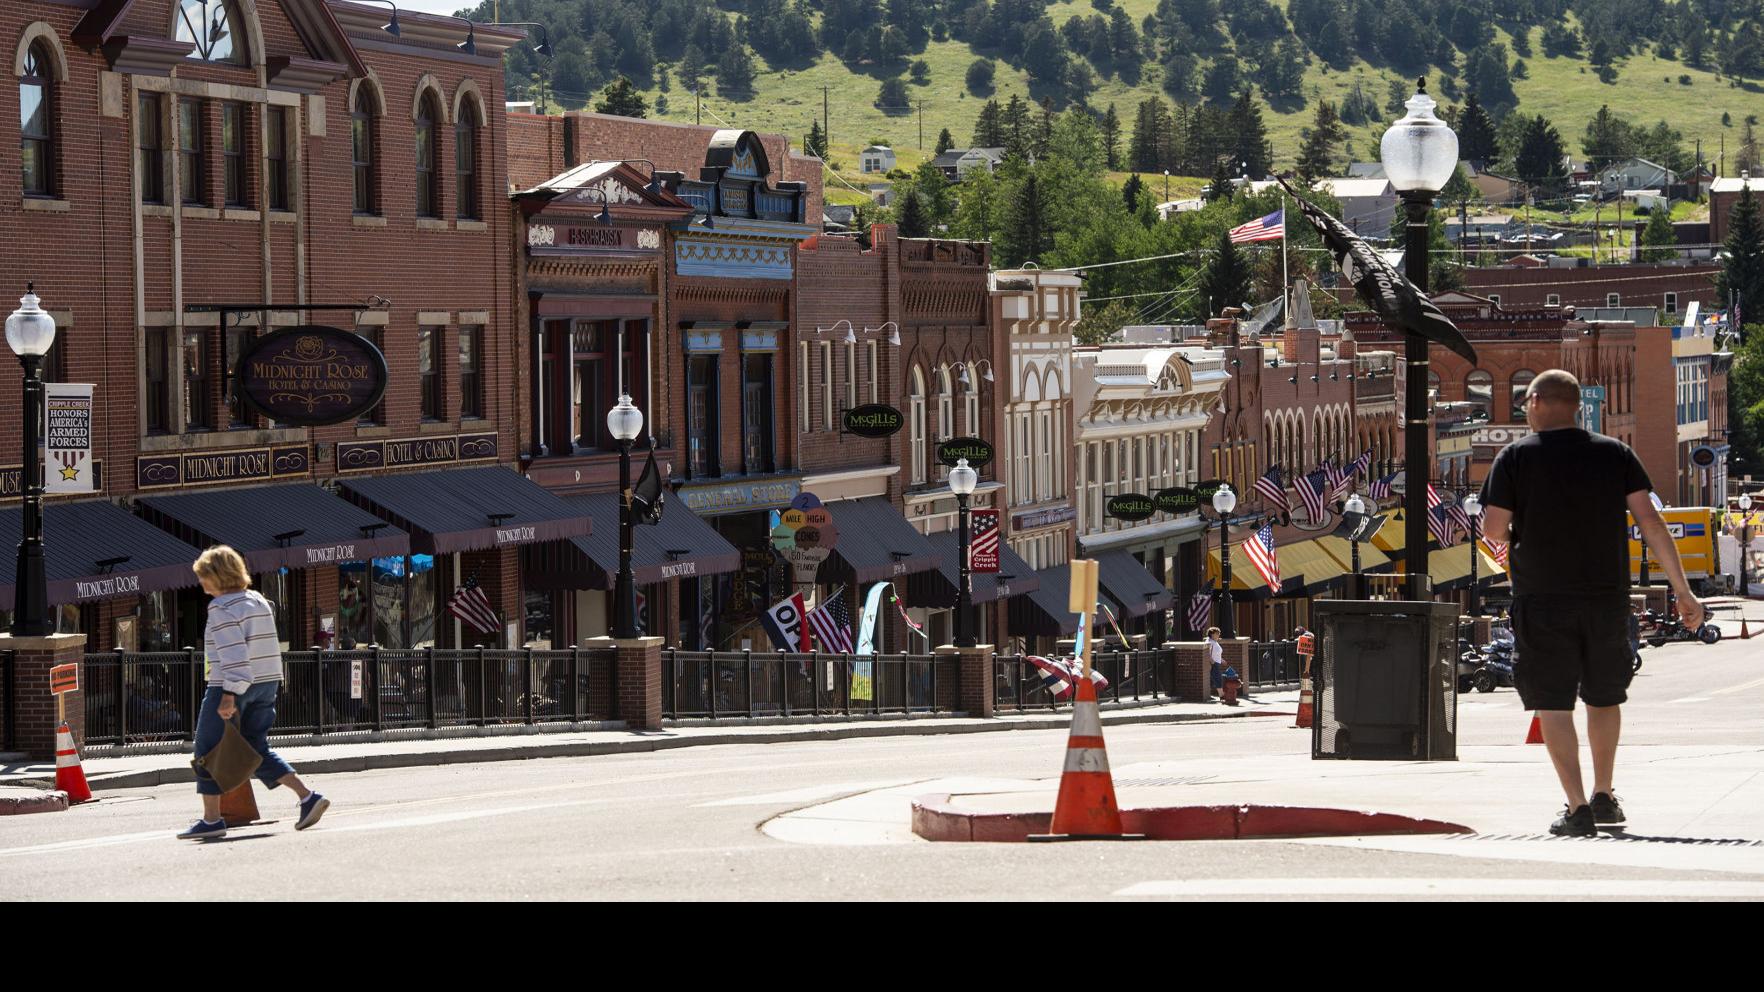 Cripple Creek is poised for a casino building boom, but some worry that the  town's history will be sacrificed - The Colorado Sun